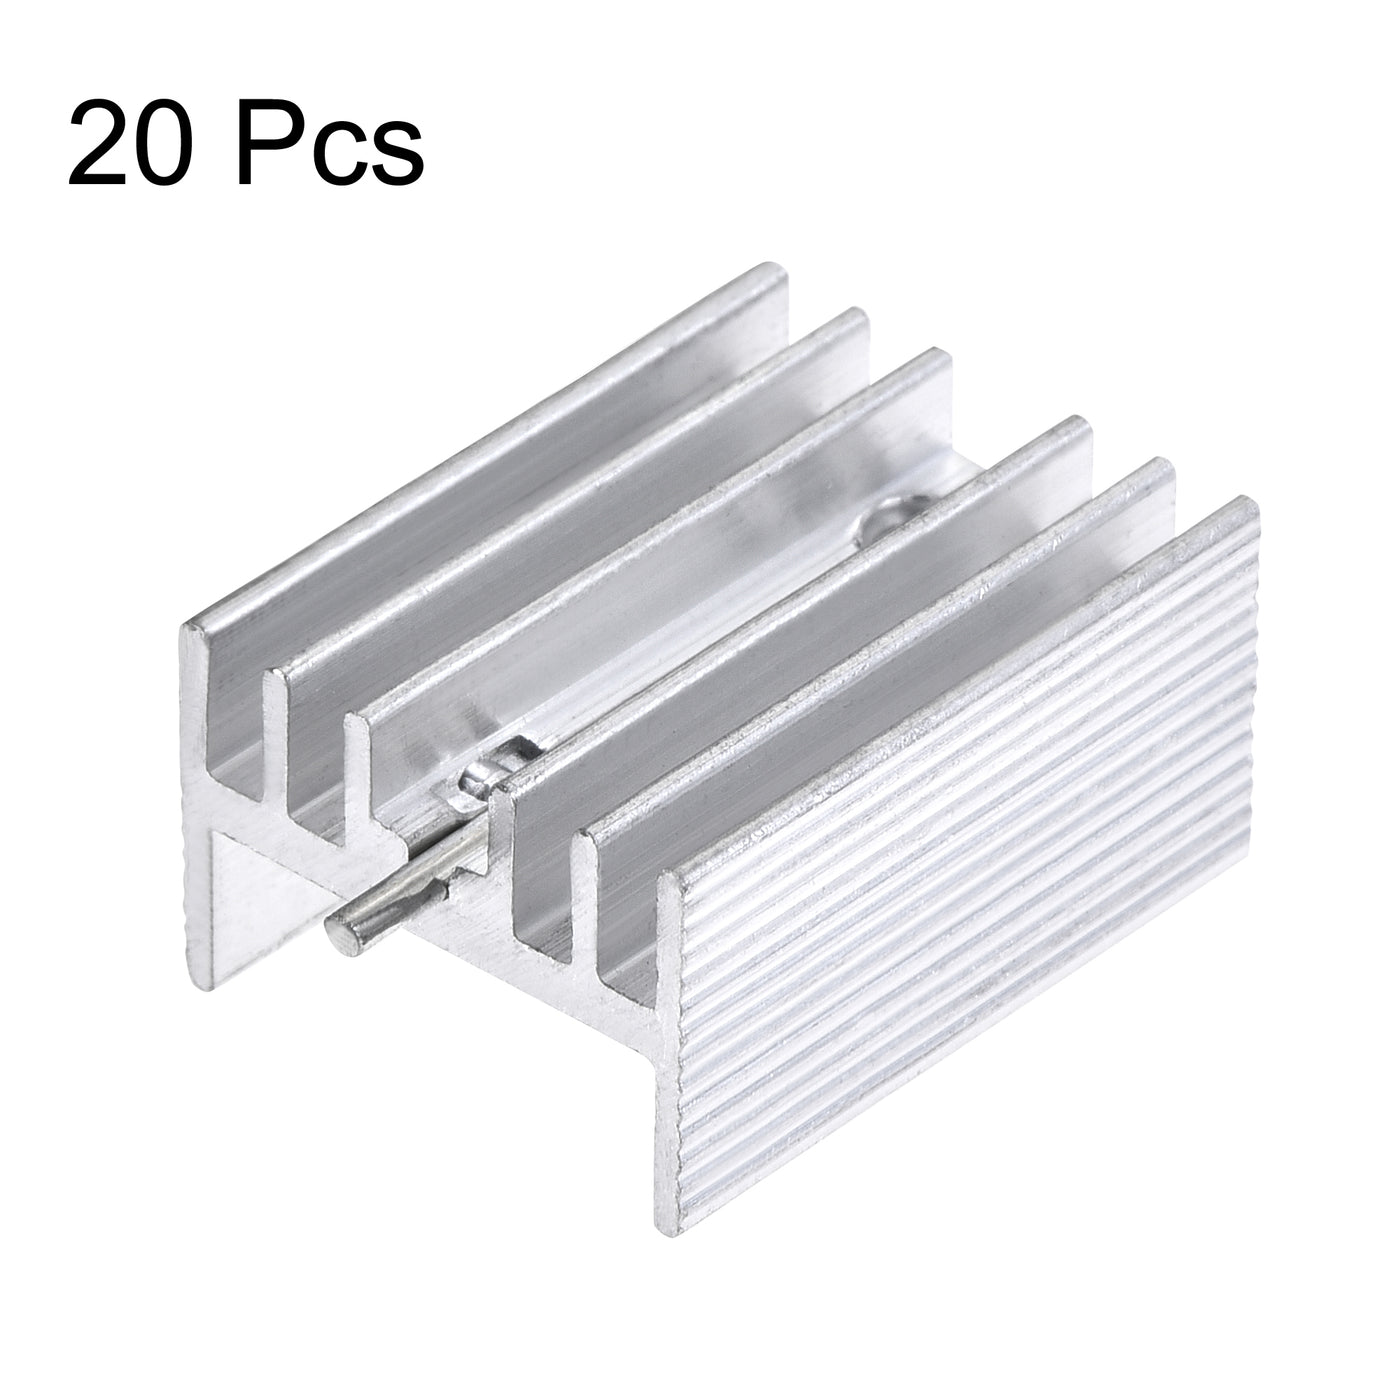 uxcell Uxcell 20x15x10mm TO-220 Aluminum Heatsink for Cooling MOSFET Transistor Diodes with a Support Pin 20pcs